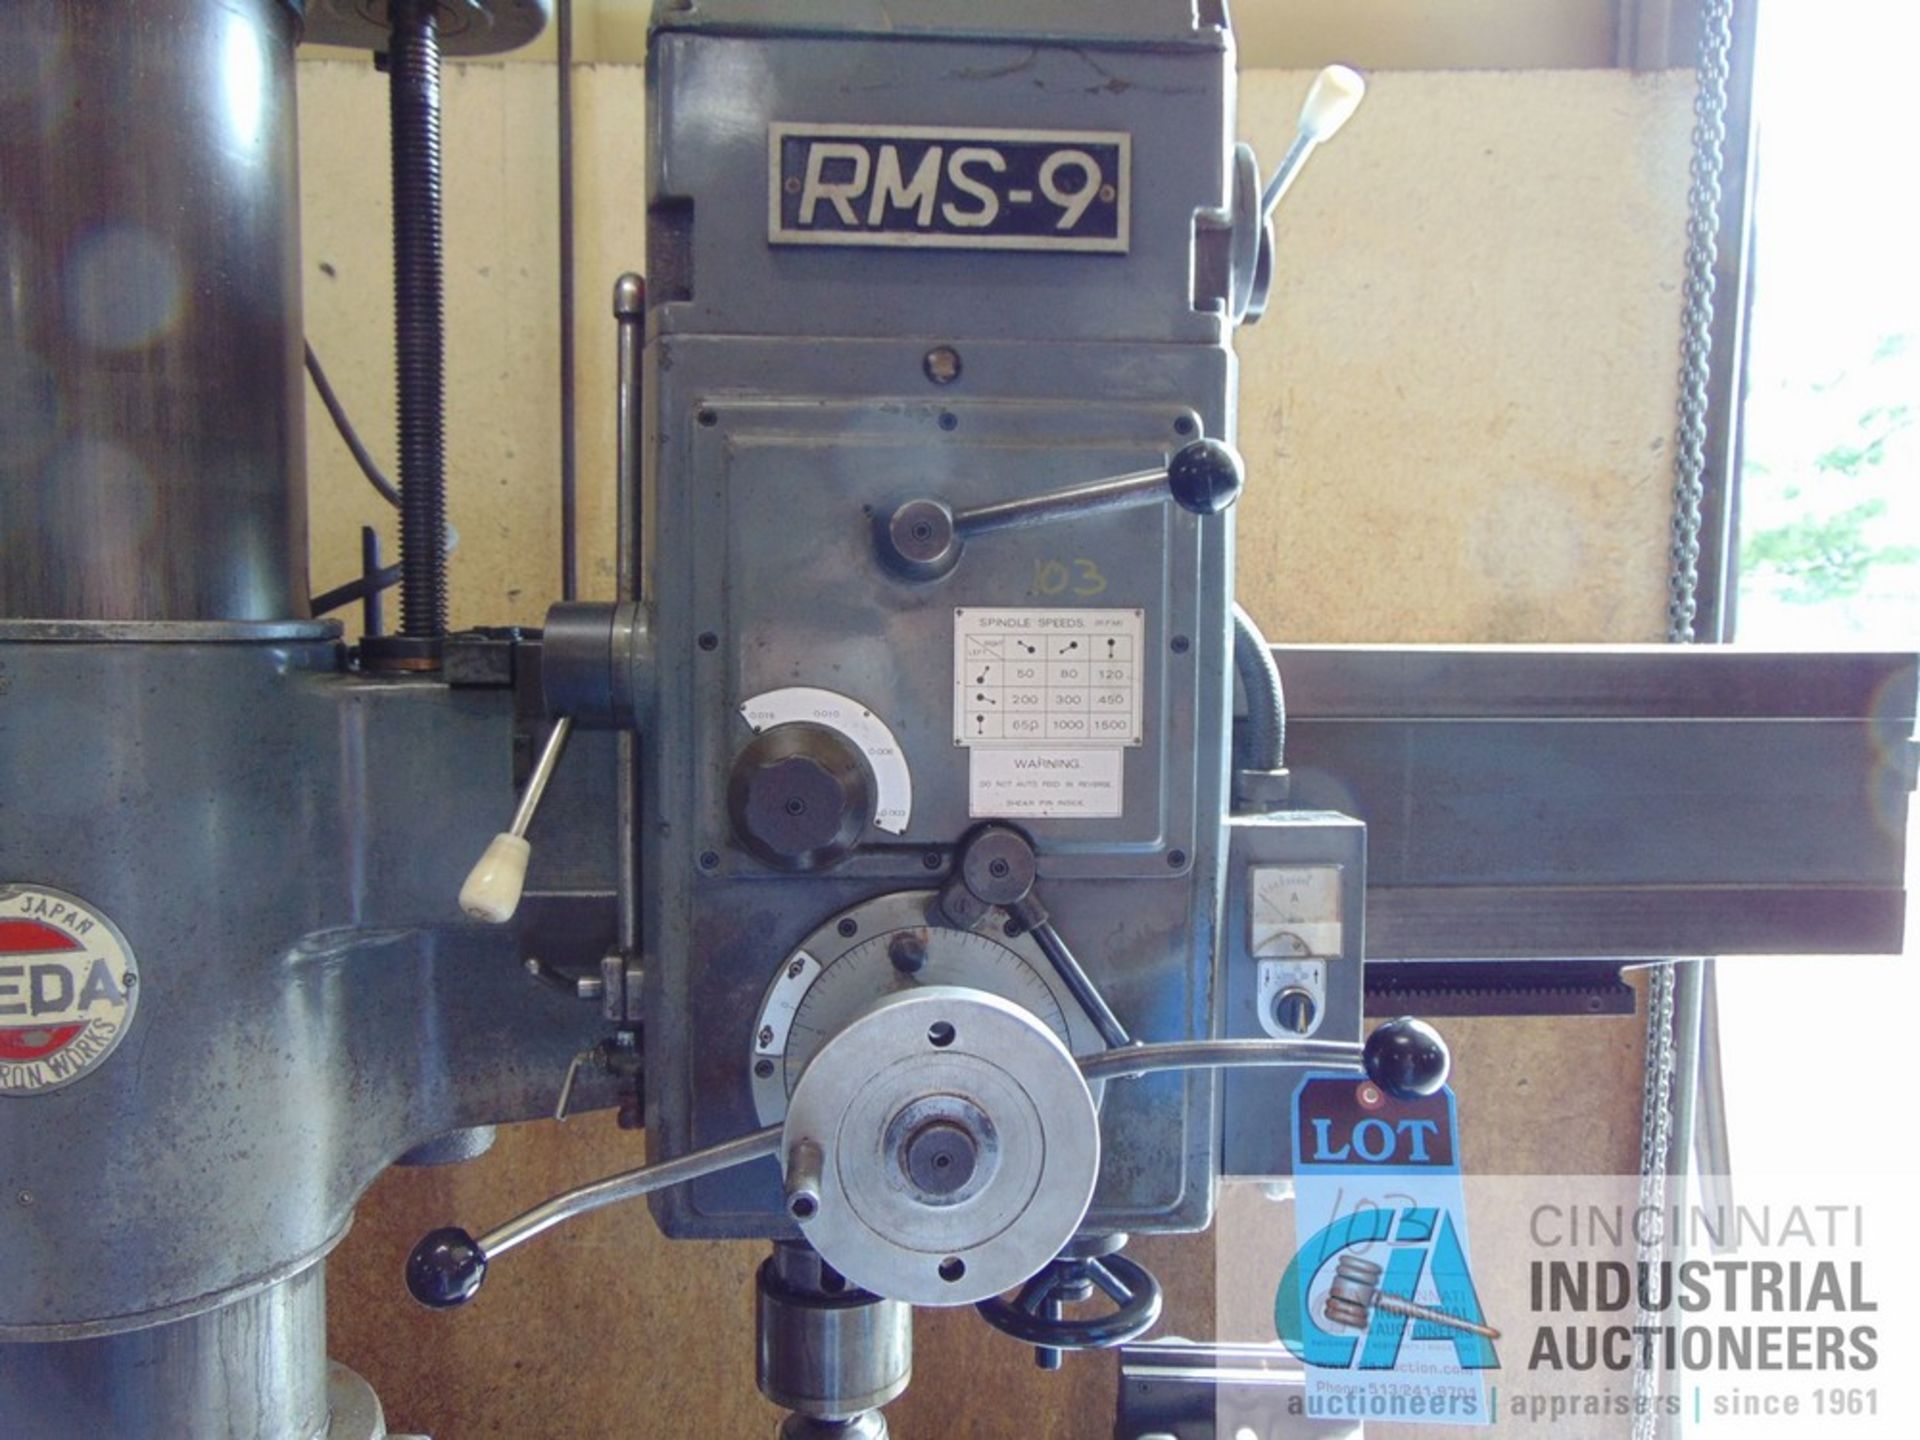 3' ARM X 9" COL. IKEDA RMS-9 RADIAL ARM DRILL; S/N 78380, 50 - 1,500 RPM SPINDLE, 16" X 20" X 16" - Image 3 of 3